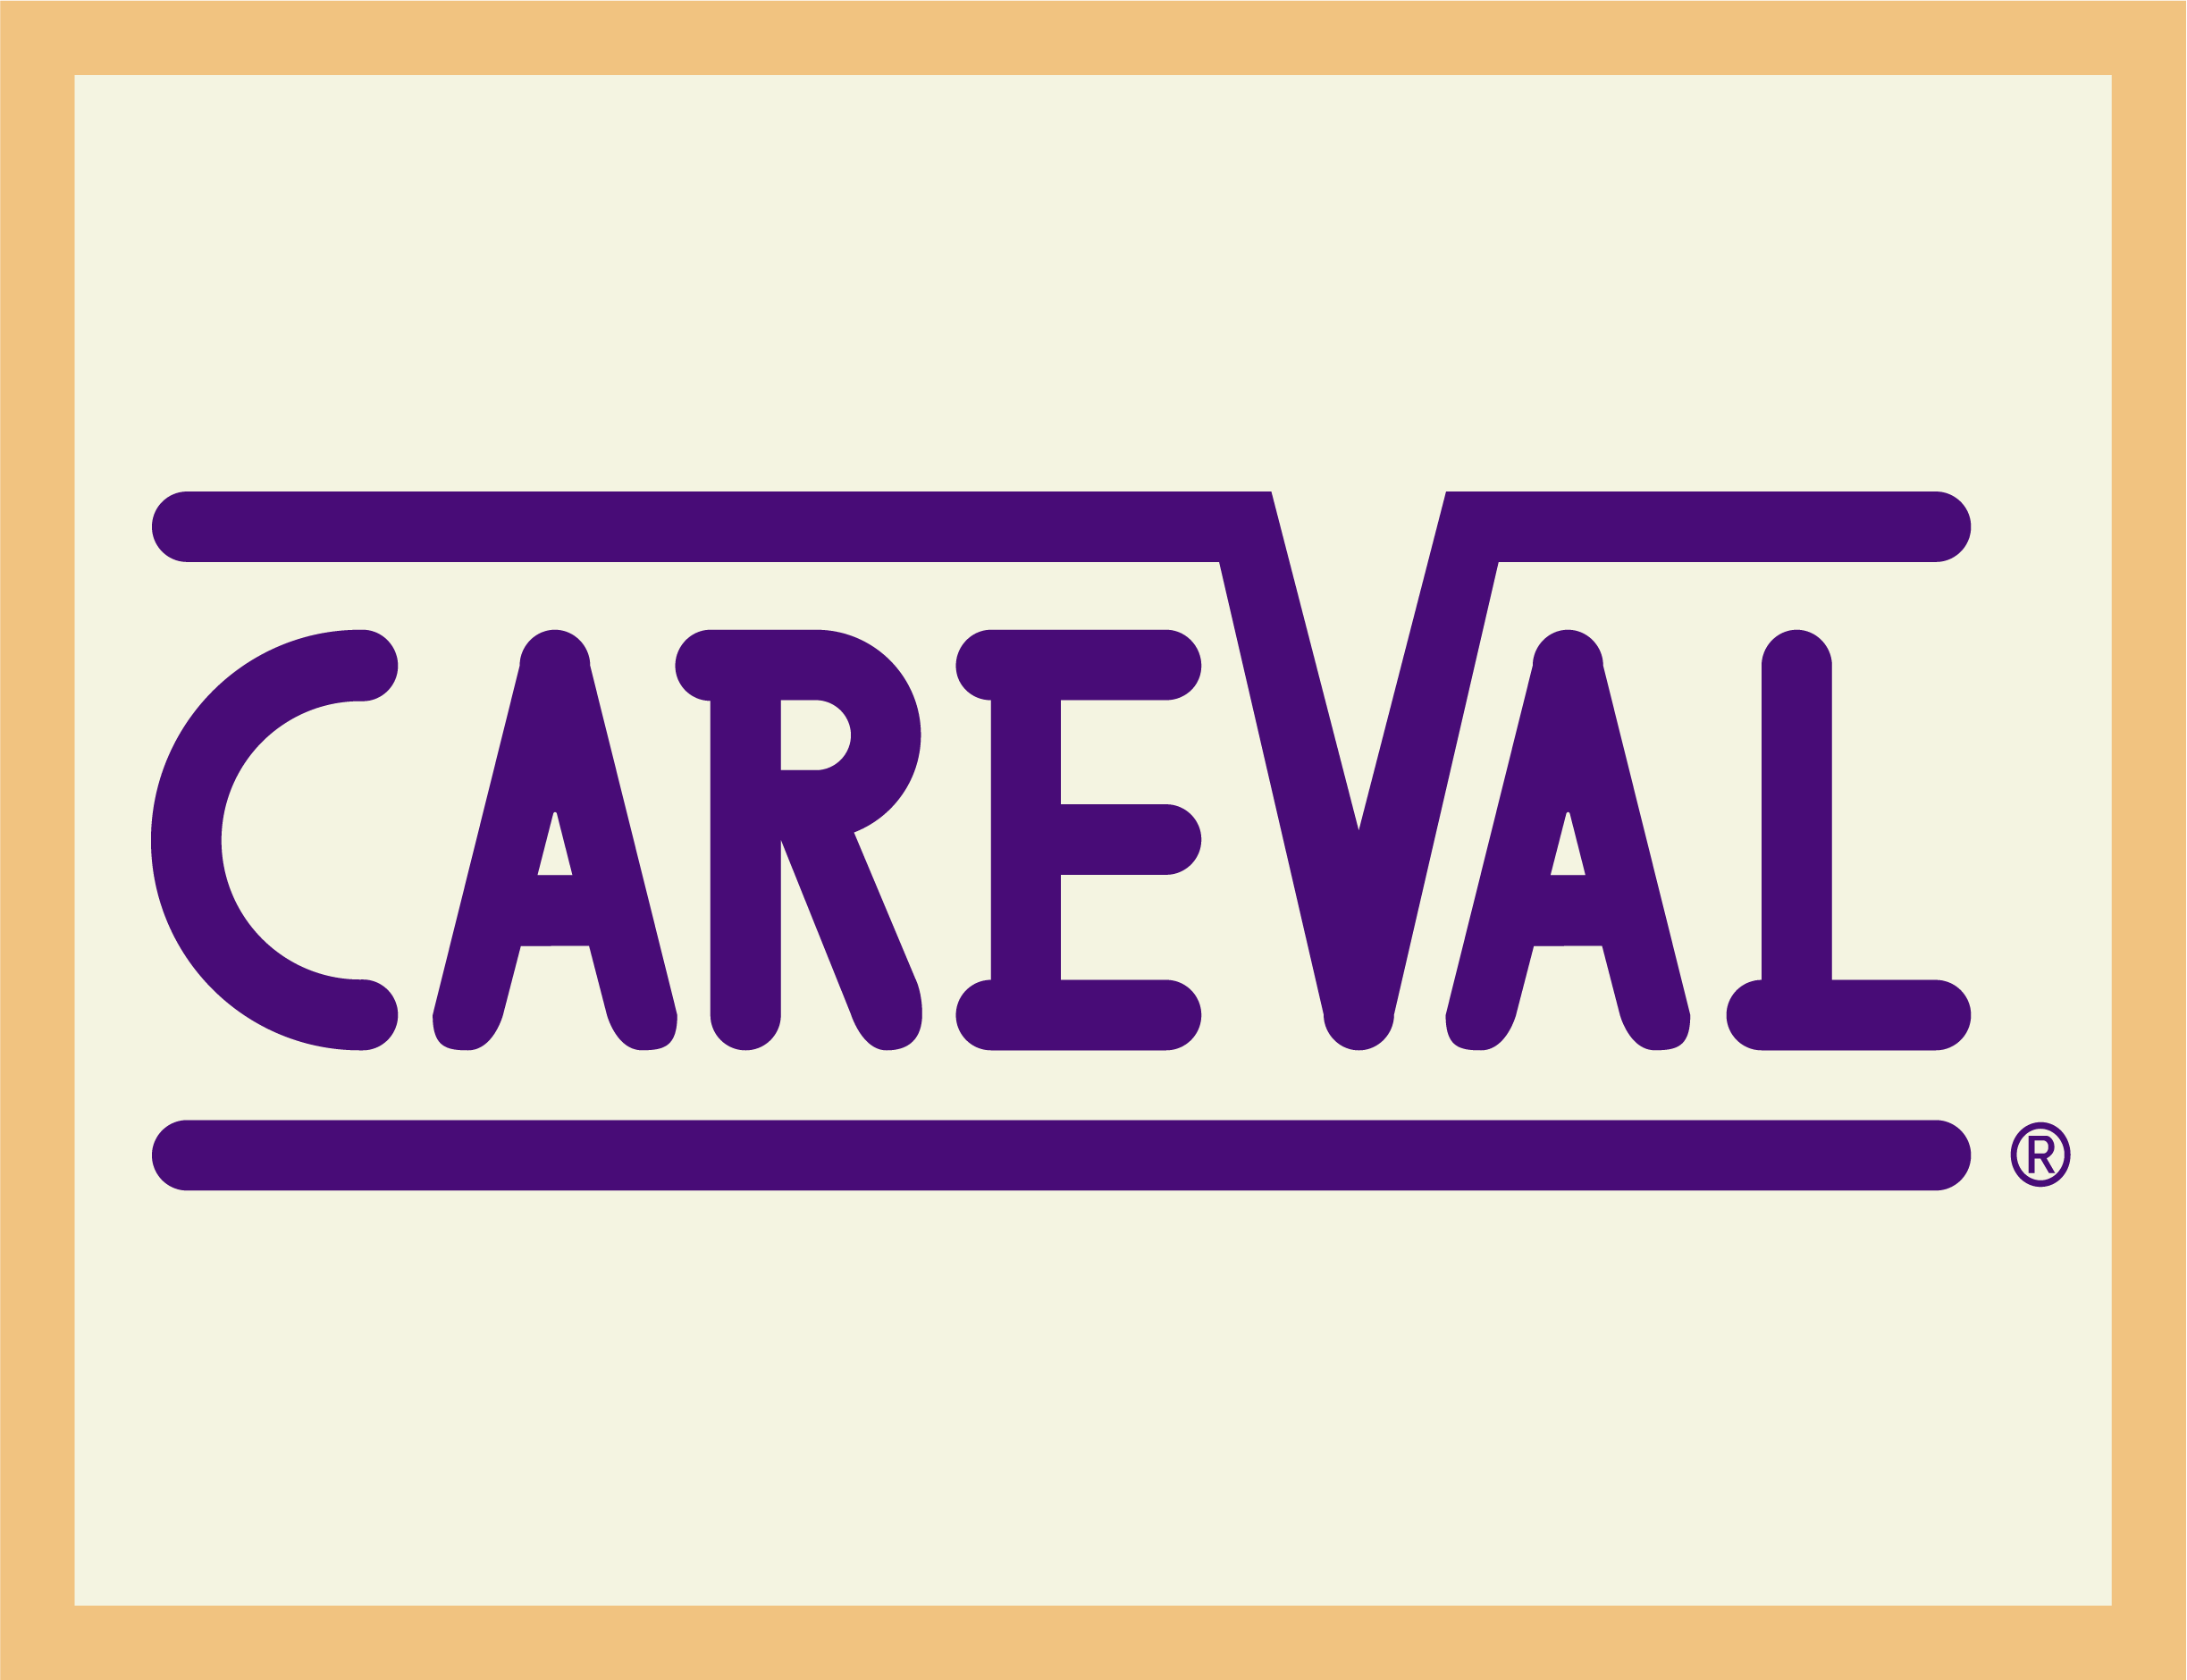 Logo of CAREVAL - the research product that is the 'hospital direction setter'